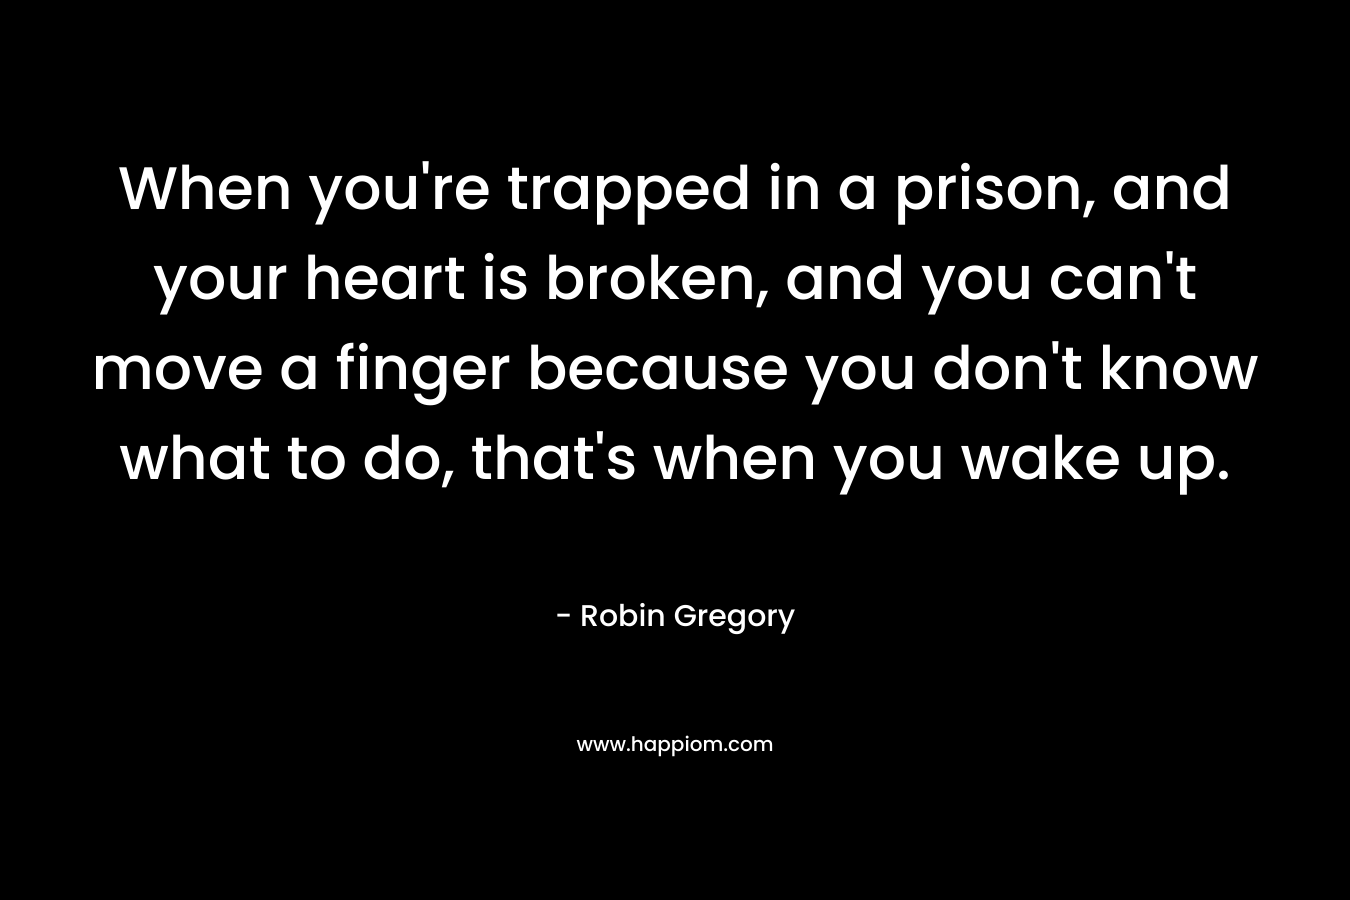 When you're trapped in a prison, and your heart is broken, and you can't move a finger because you don't know what to do, that's when you wake up.